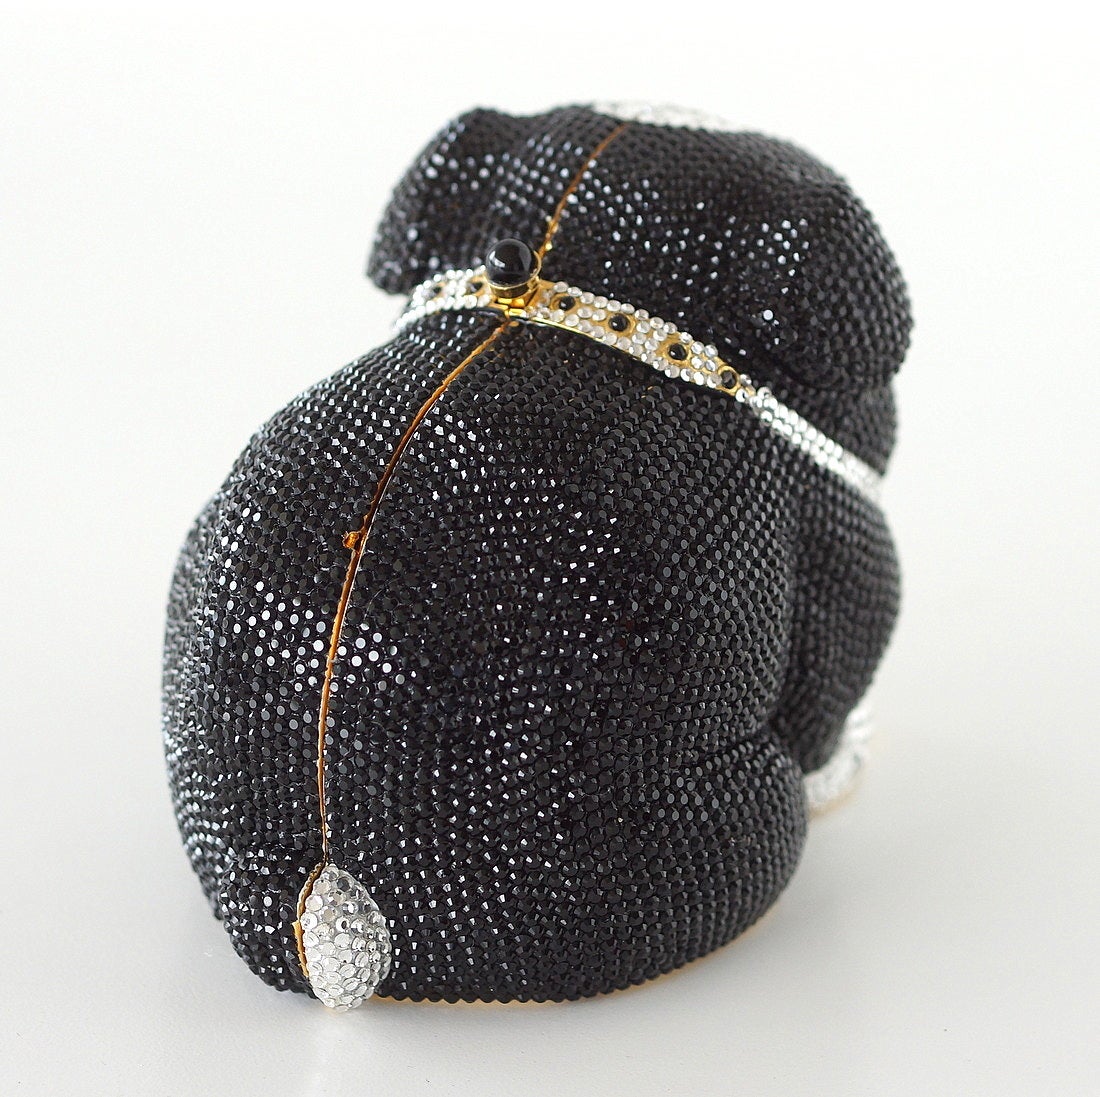 Rare charming Bulldog in black and white signature Swarovski Austrian crystals.
Rear of jeweled collar has push lock closure.
The entire shaping and facial expression will make you fall in love with this treasure.
Interior is lined in gold